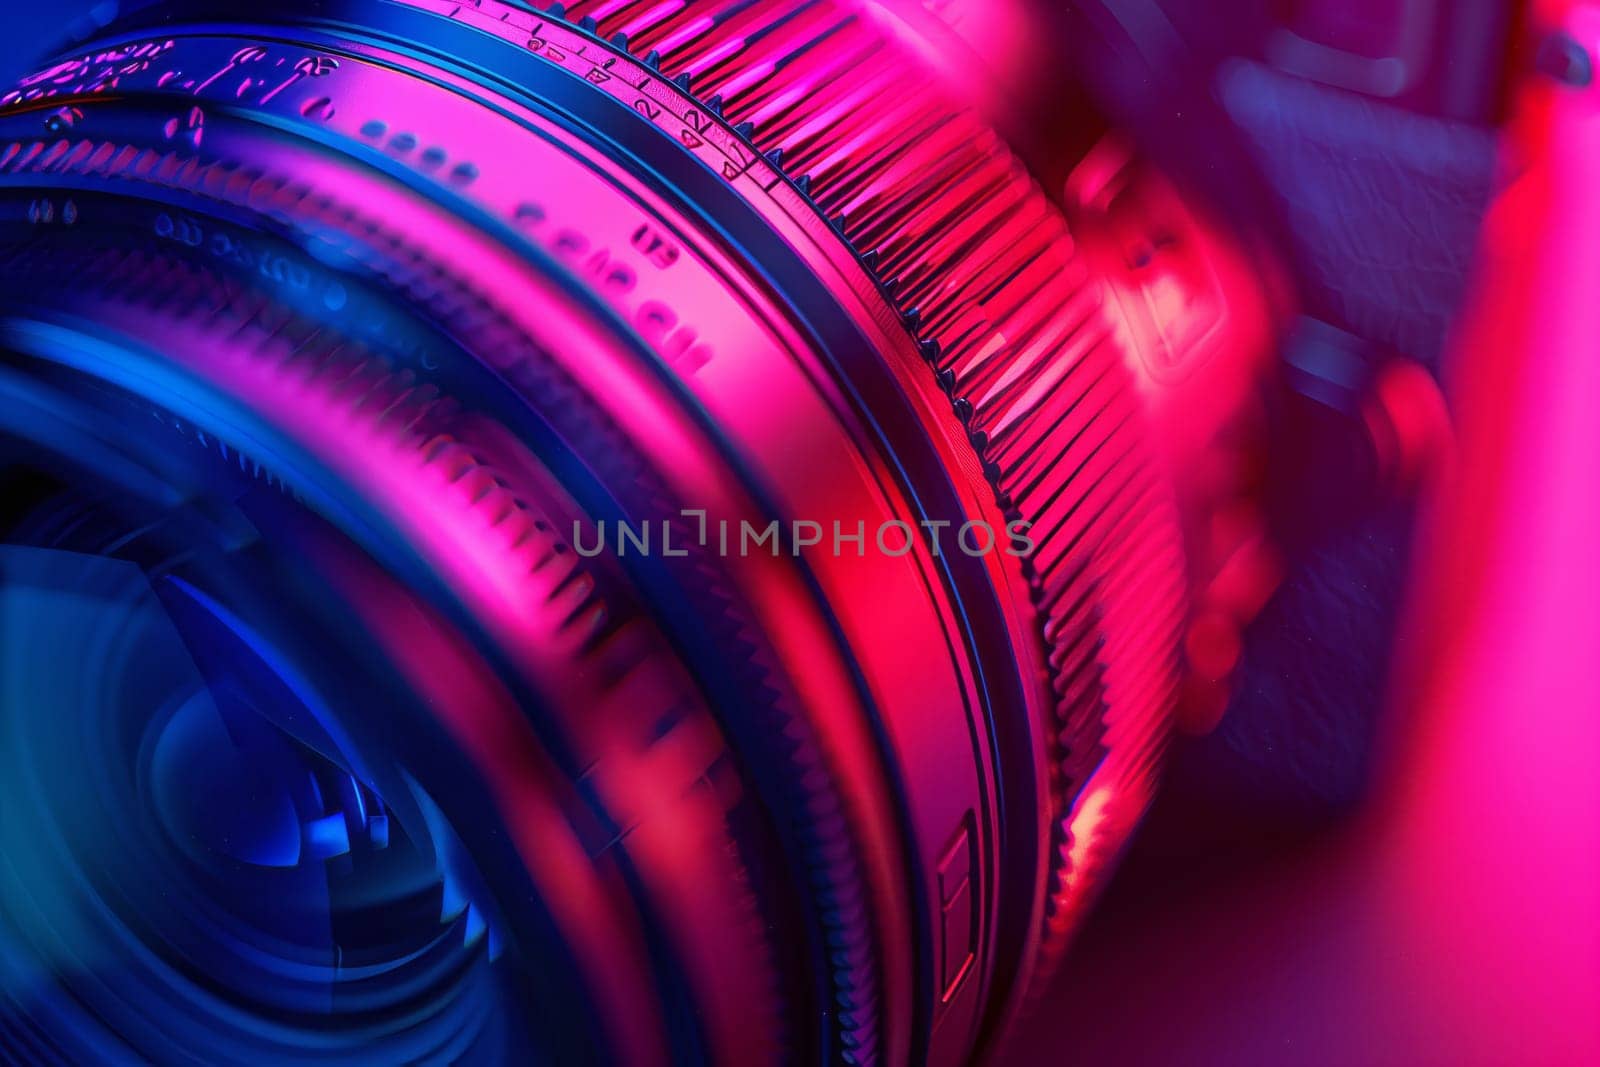 Closeup of camera lens with vibrant purple and blue lights in background by richwolf